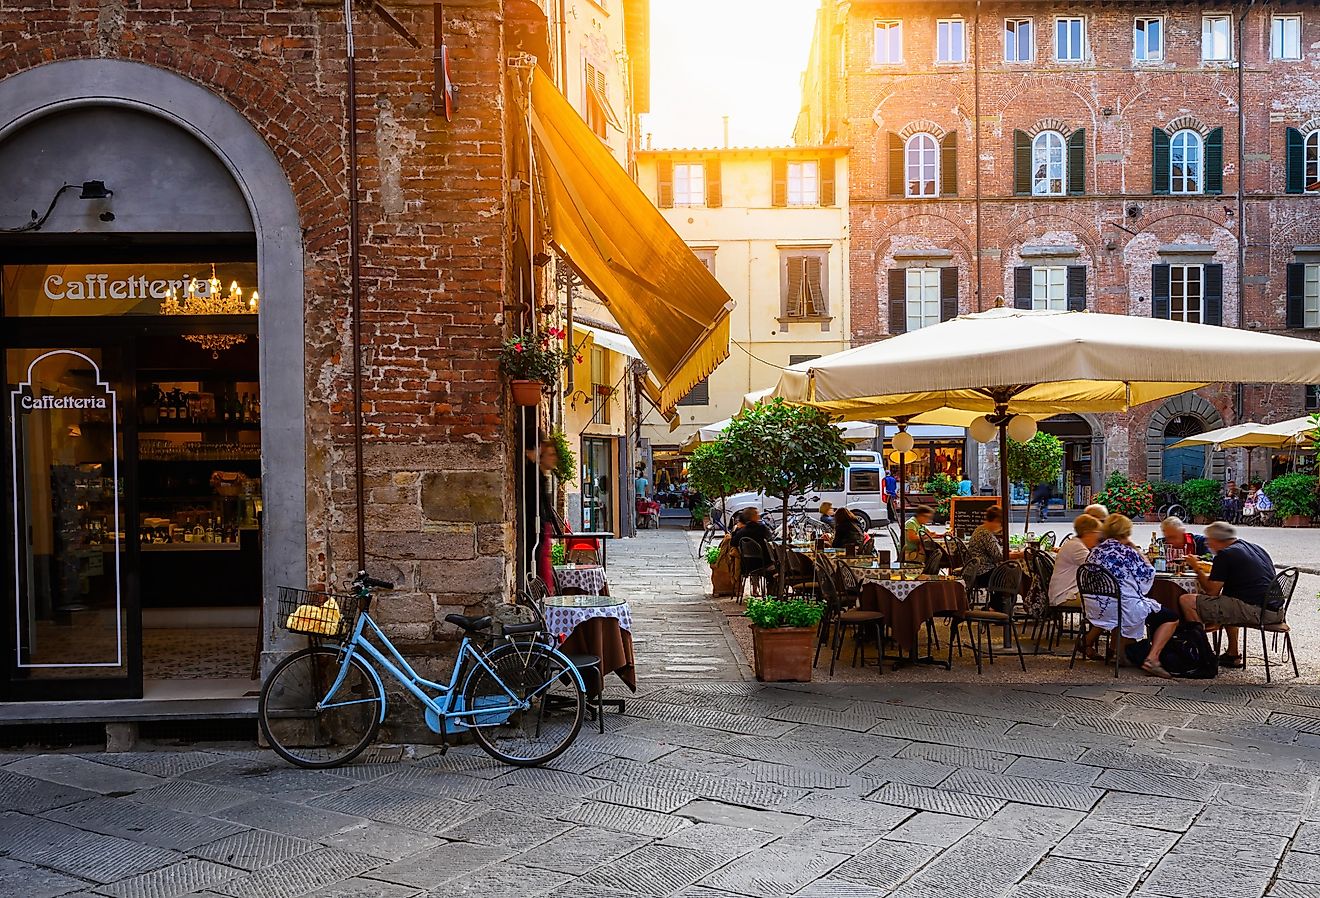 Old cozy street in Lucca, Italy, in the Tuscany region.